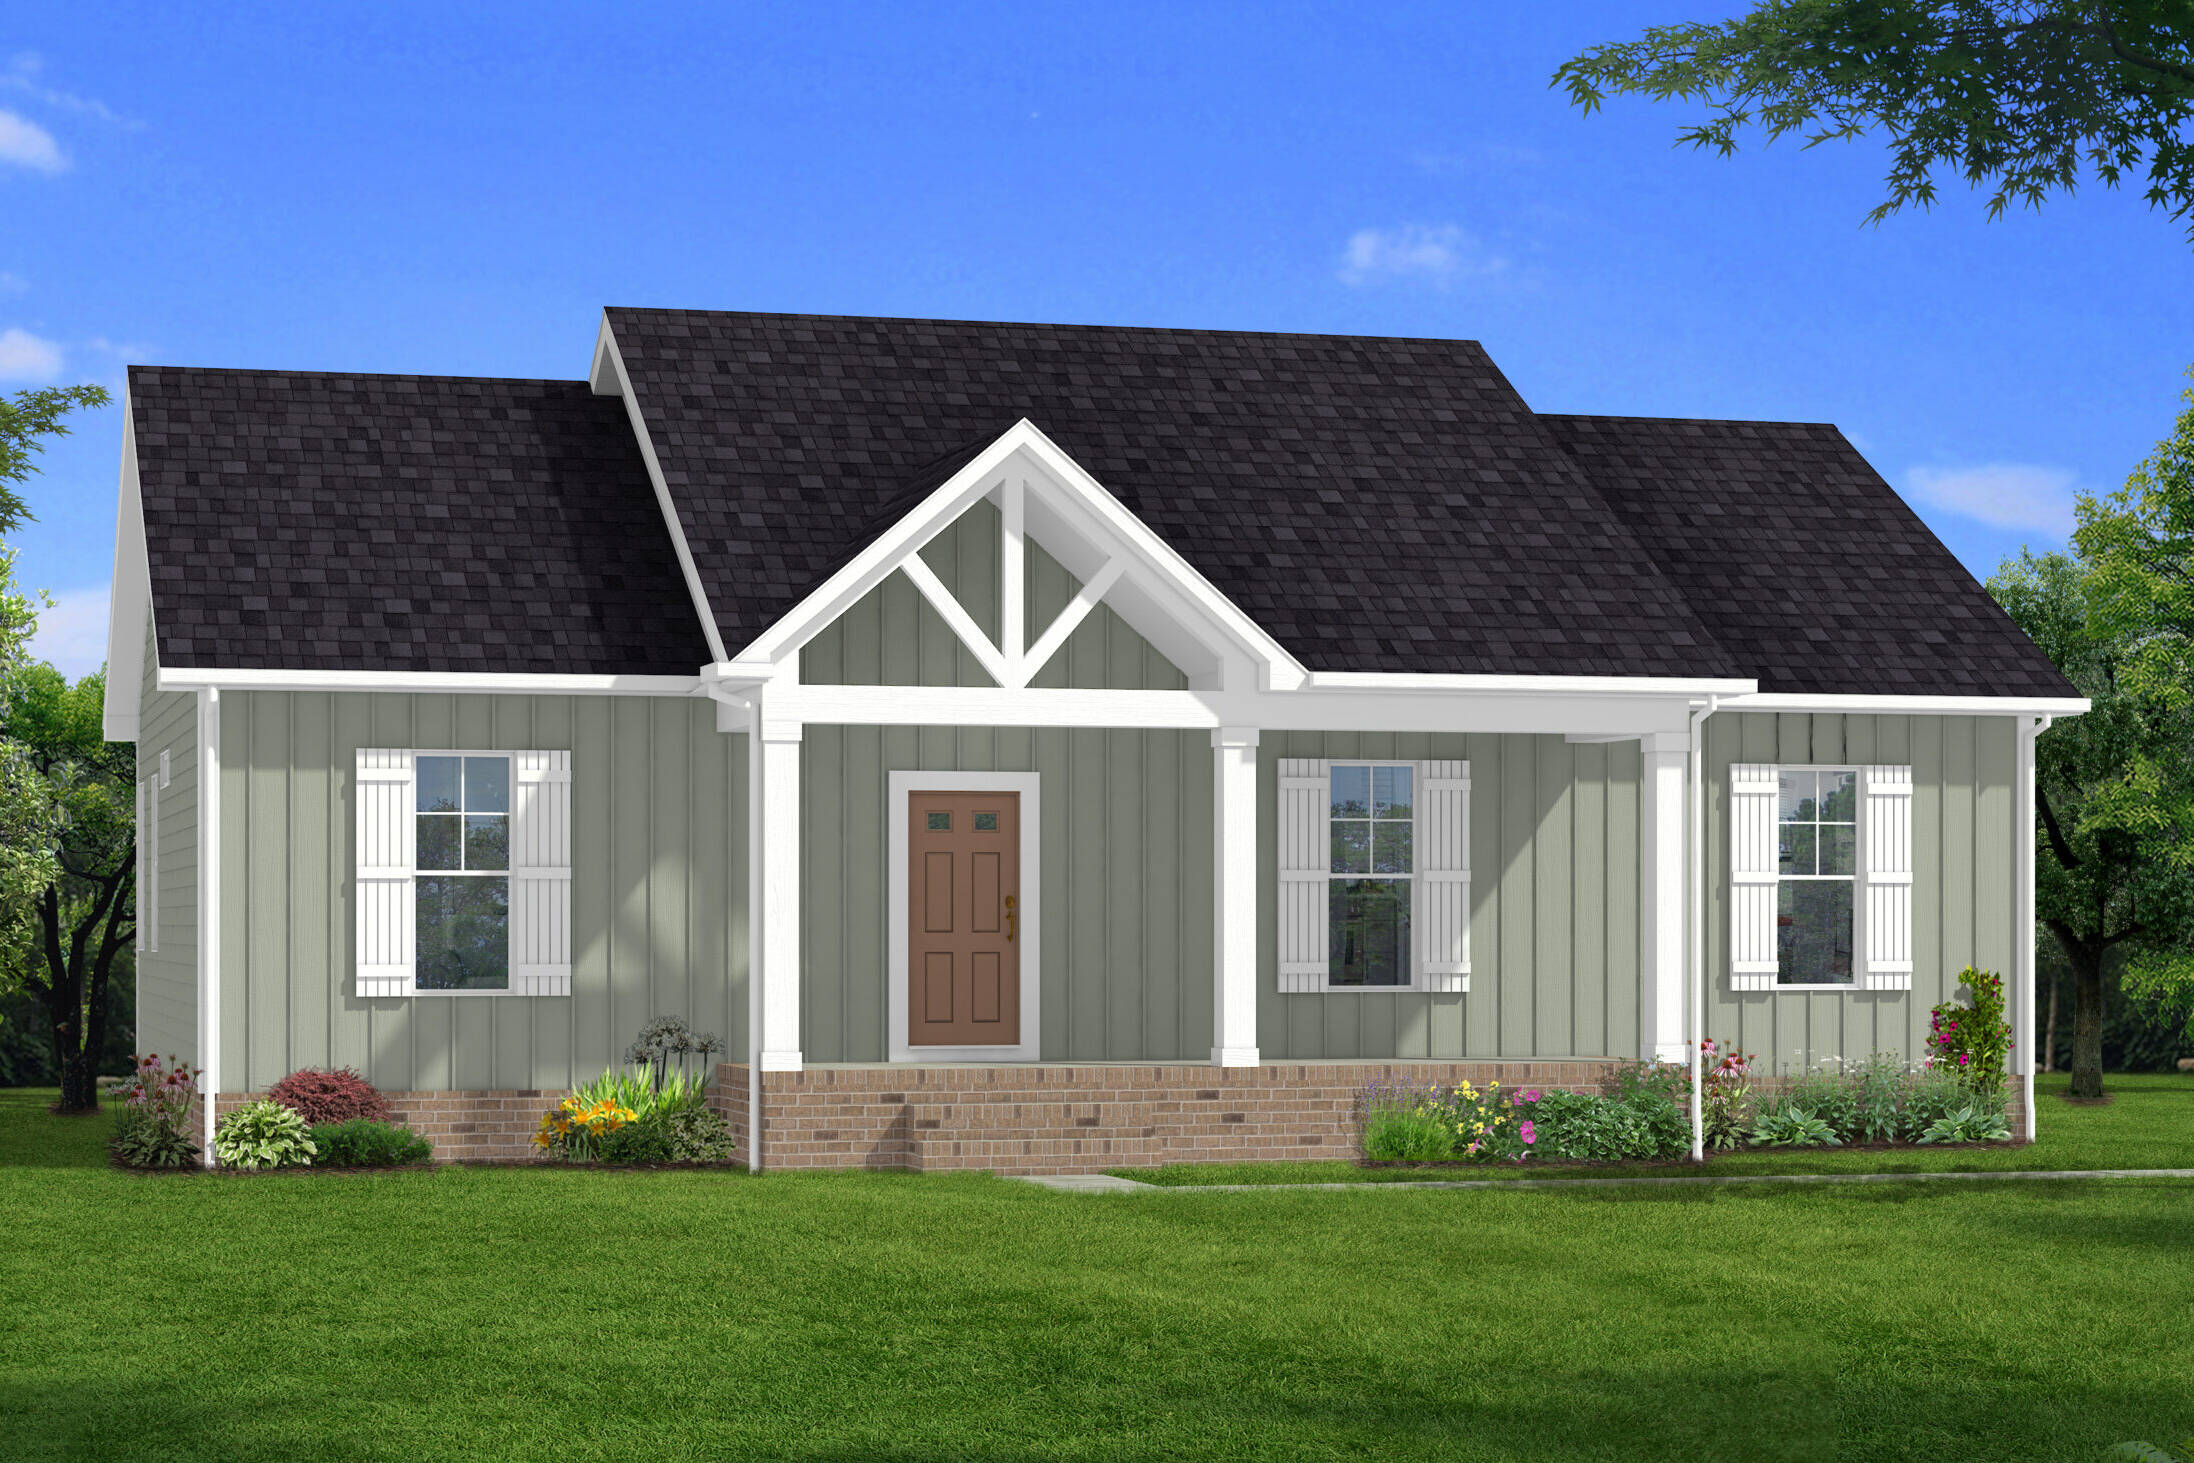 Exterior Rendering Pine Hill Lot 7 7.13.23 Scaled Uai 2194x1463, Rock River Homes